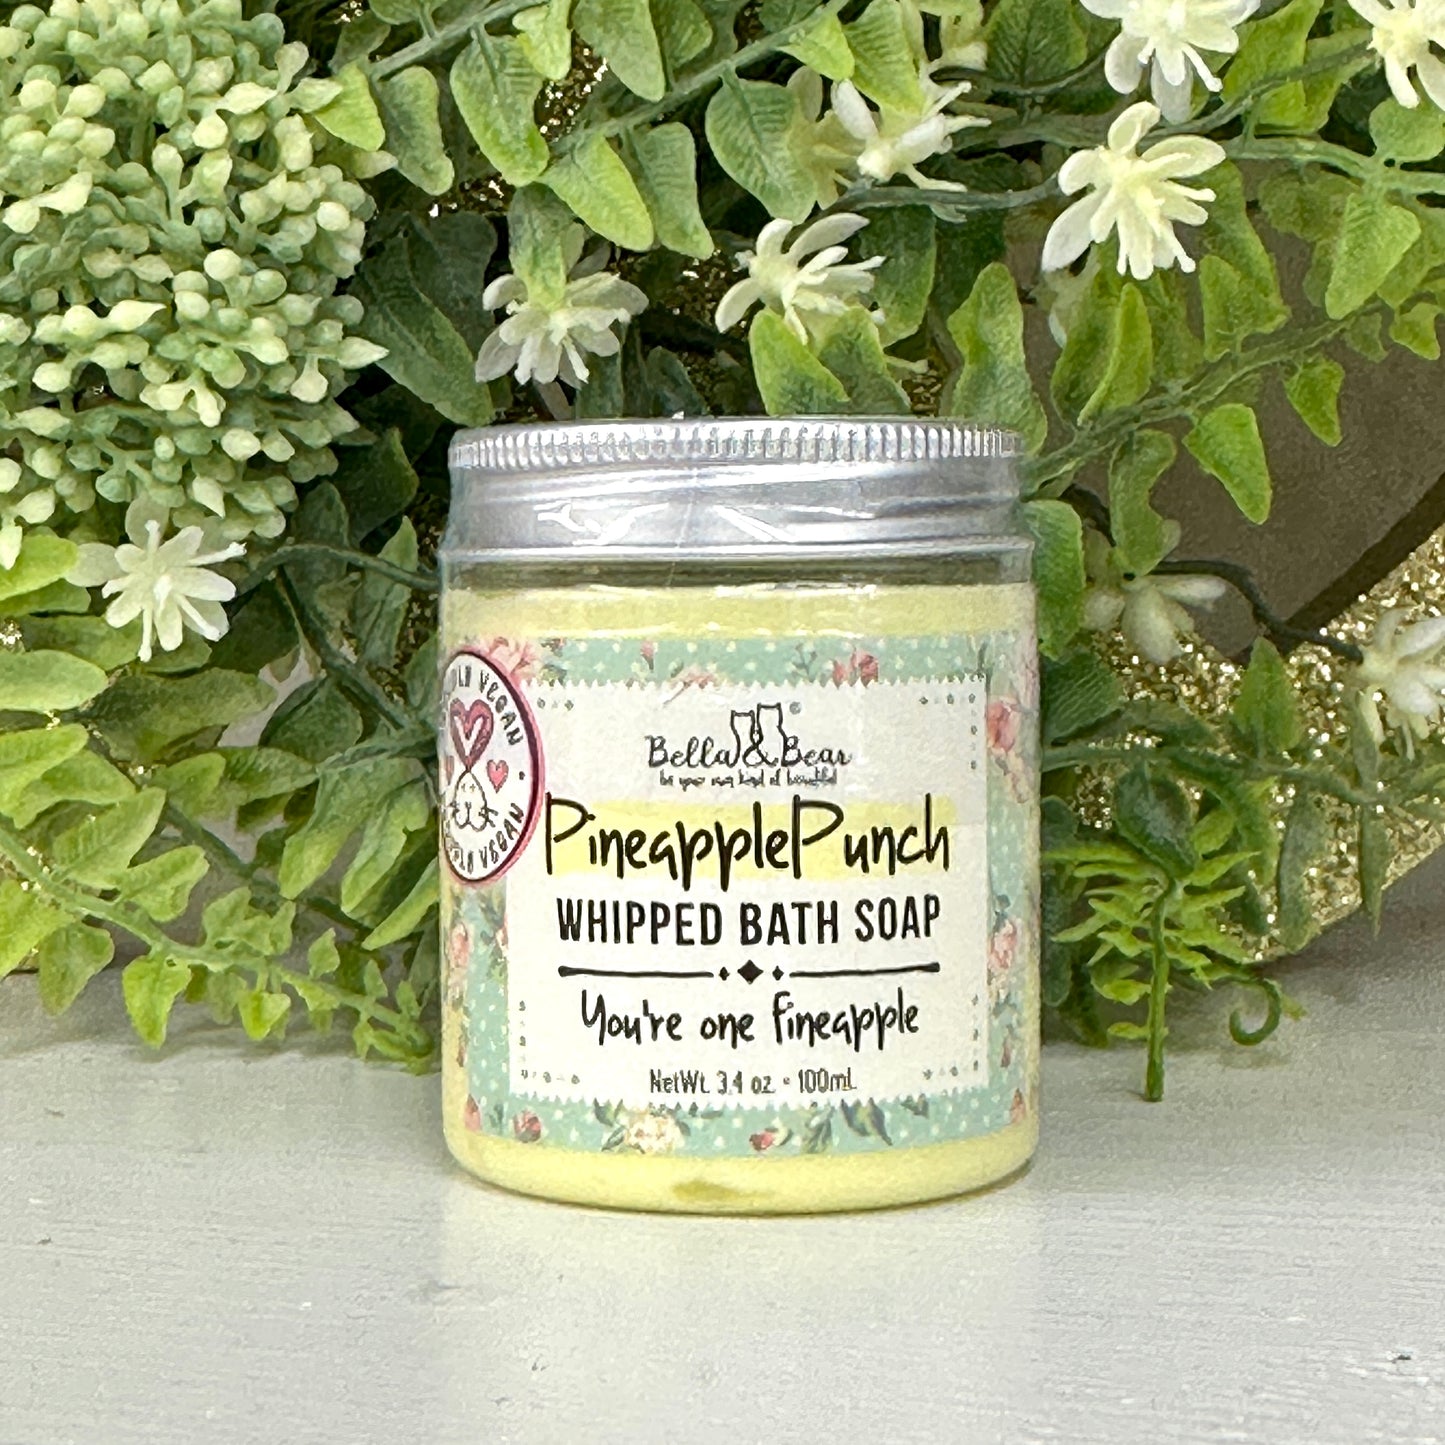 PINEAPPLE PUNCH WHIPPED BATH SOAP